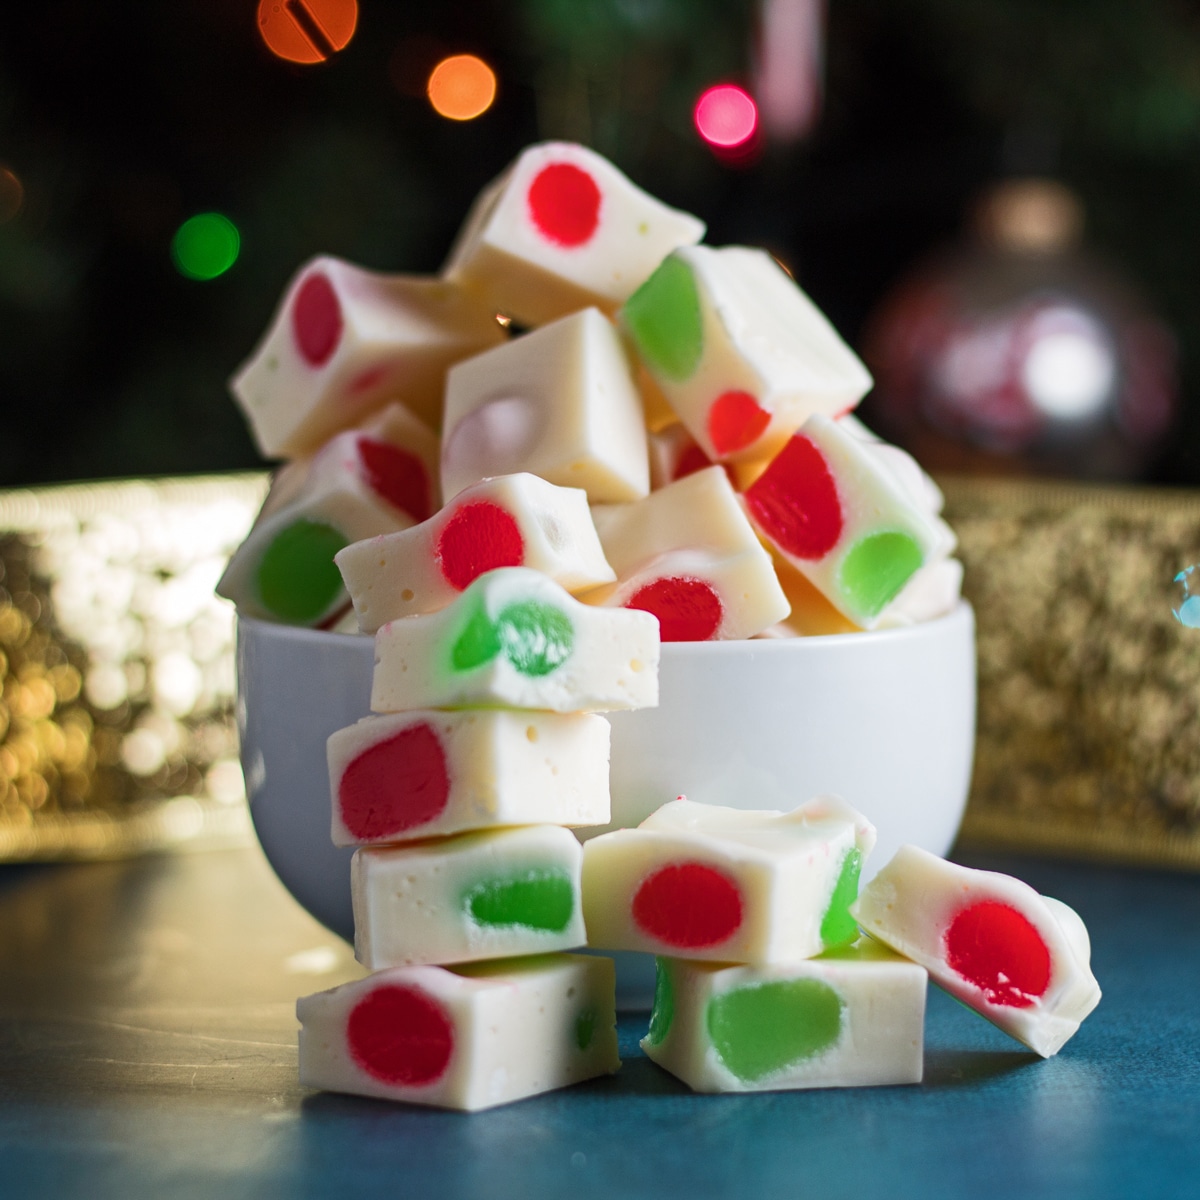 Sideview image of the Christmas Nougat candy pieces in a bowl.